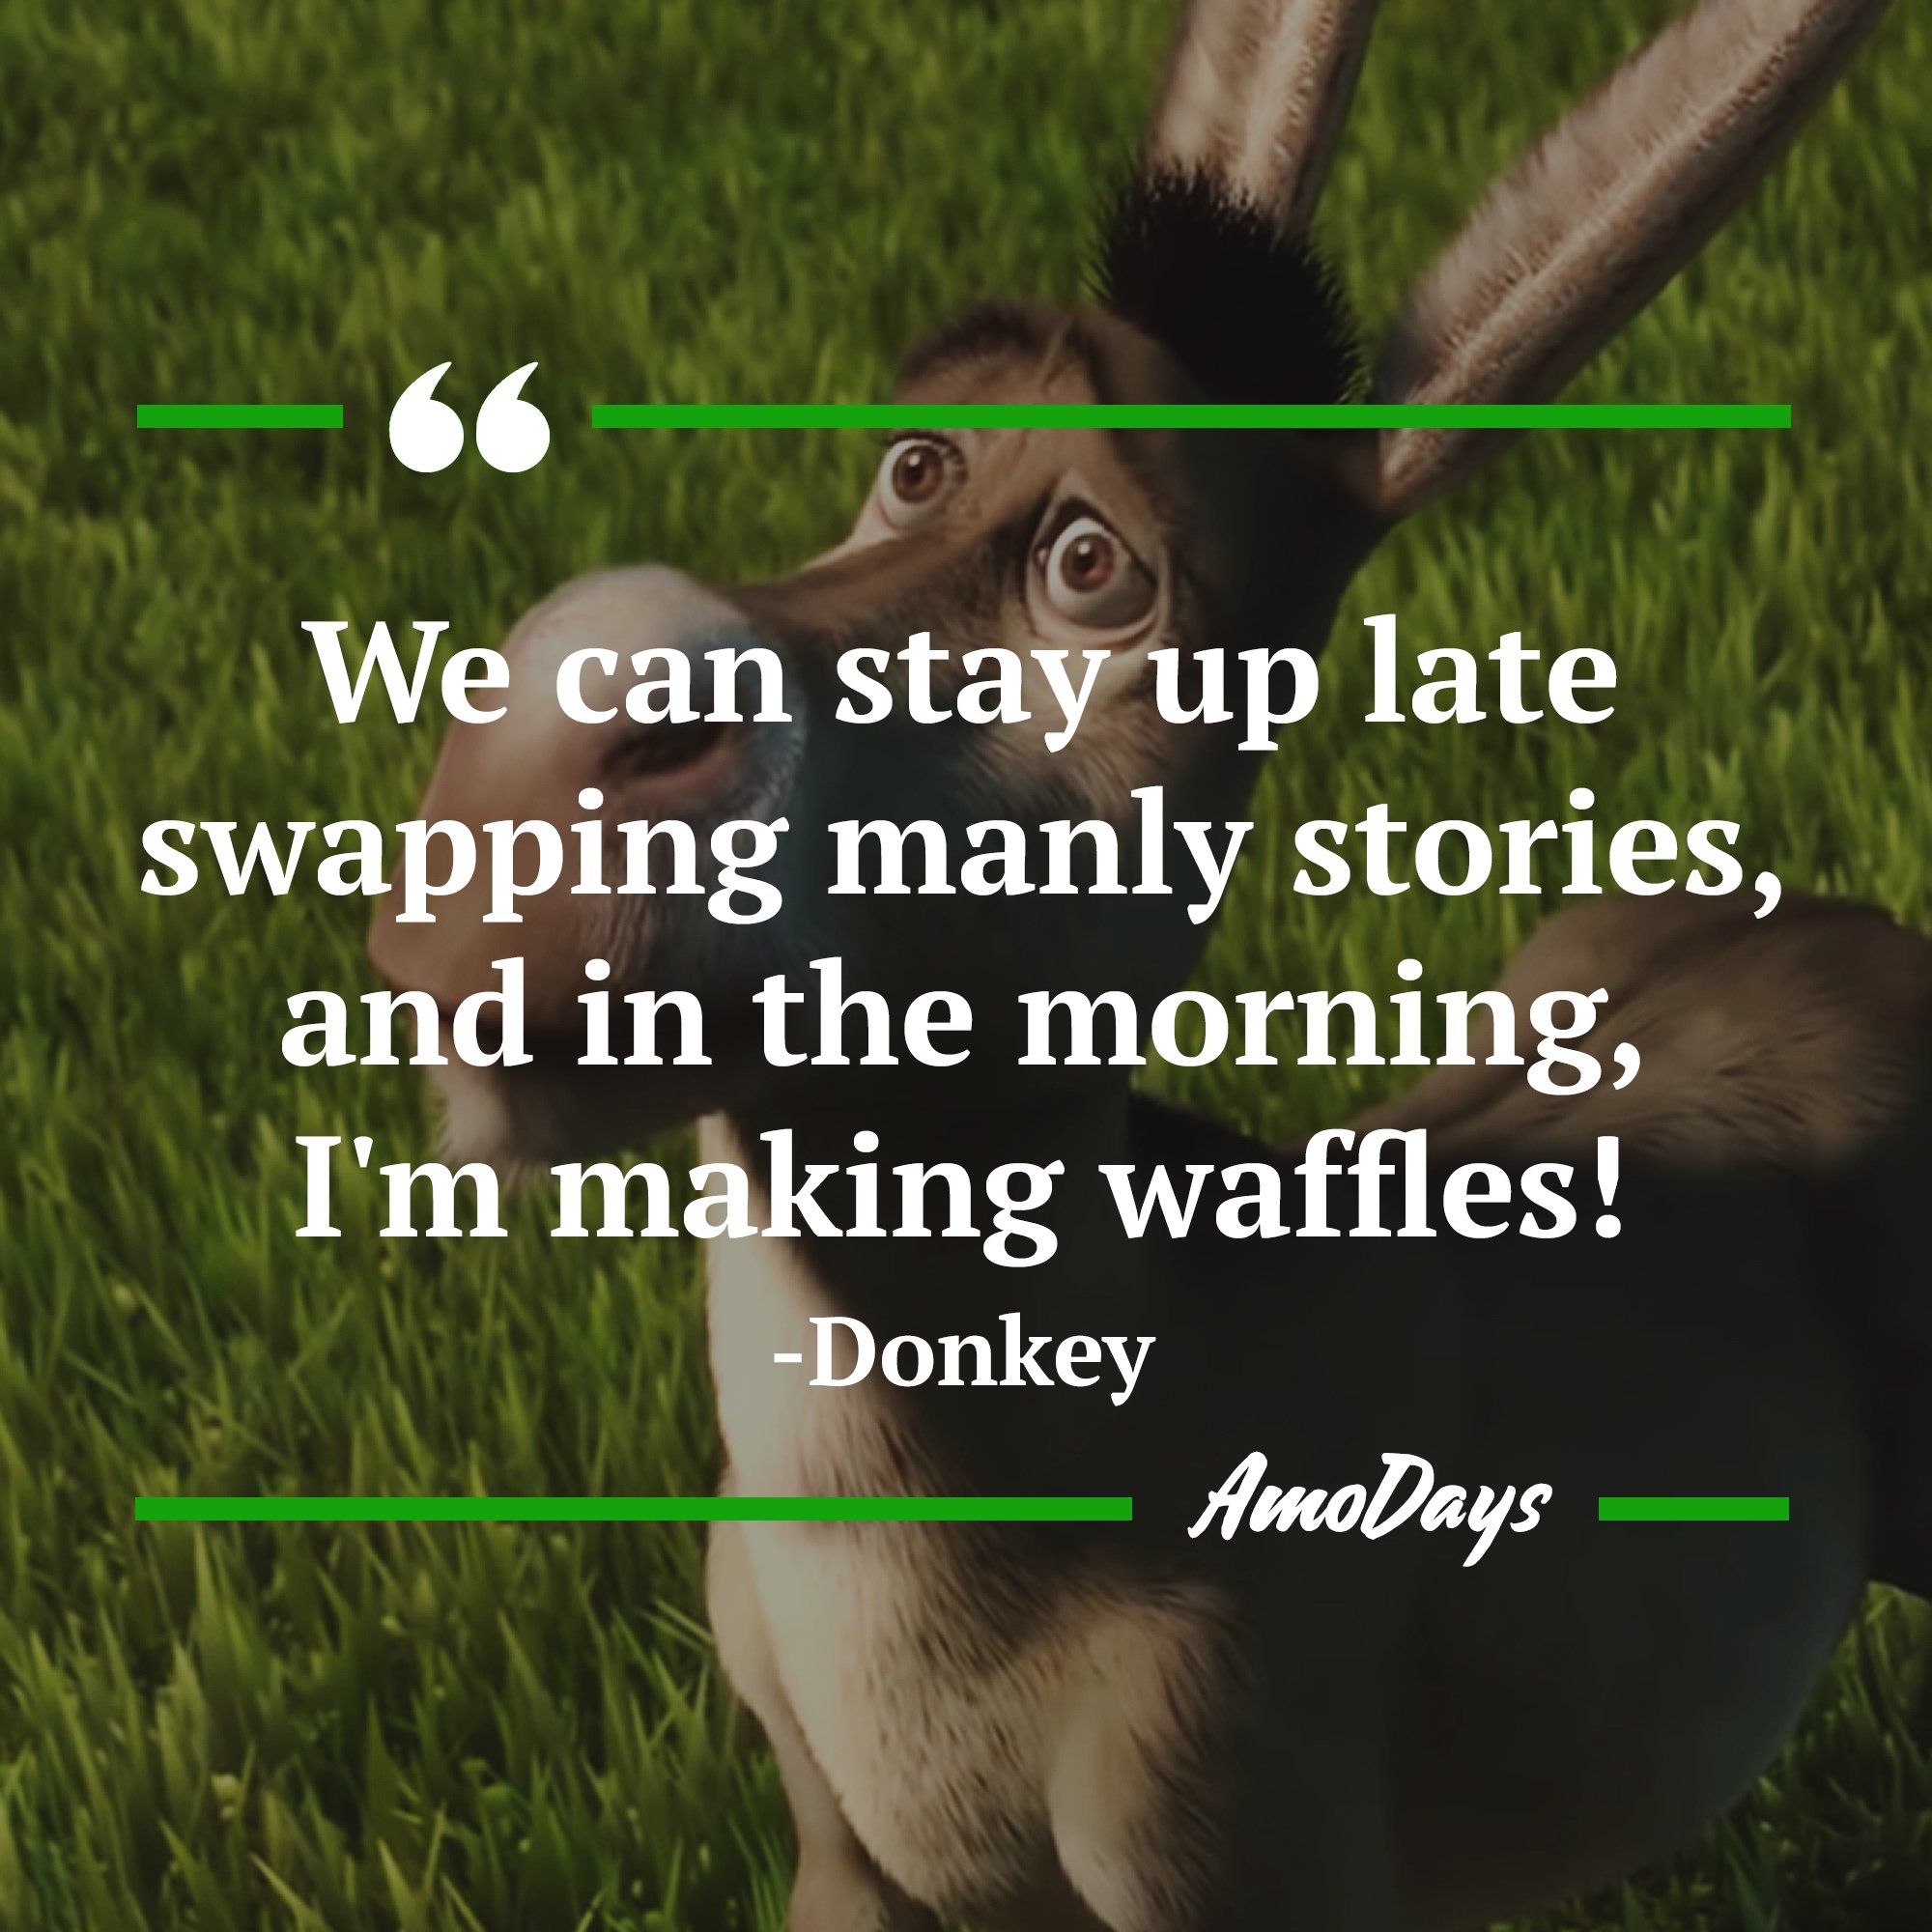 Donkey's quote: "We can stay up late swapping manly stories, and in the morning, I'm making waffles!" | Image: AmoDays